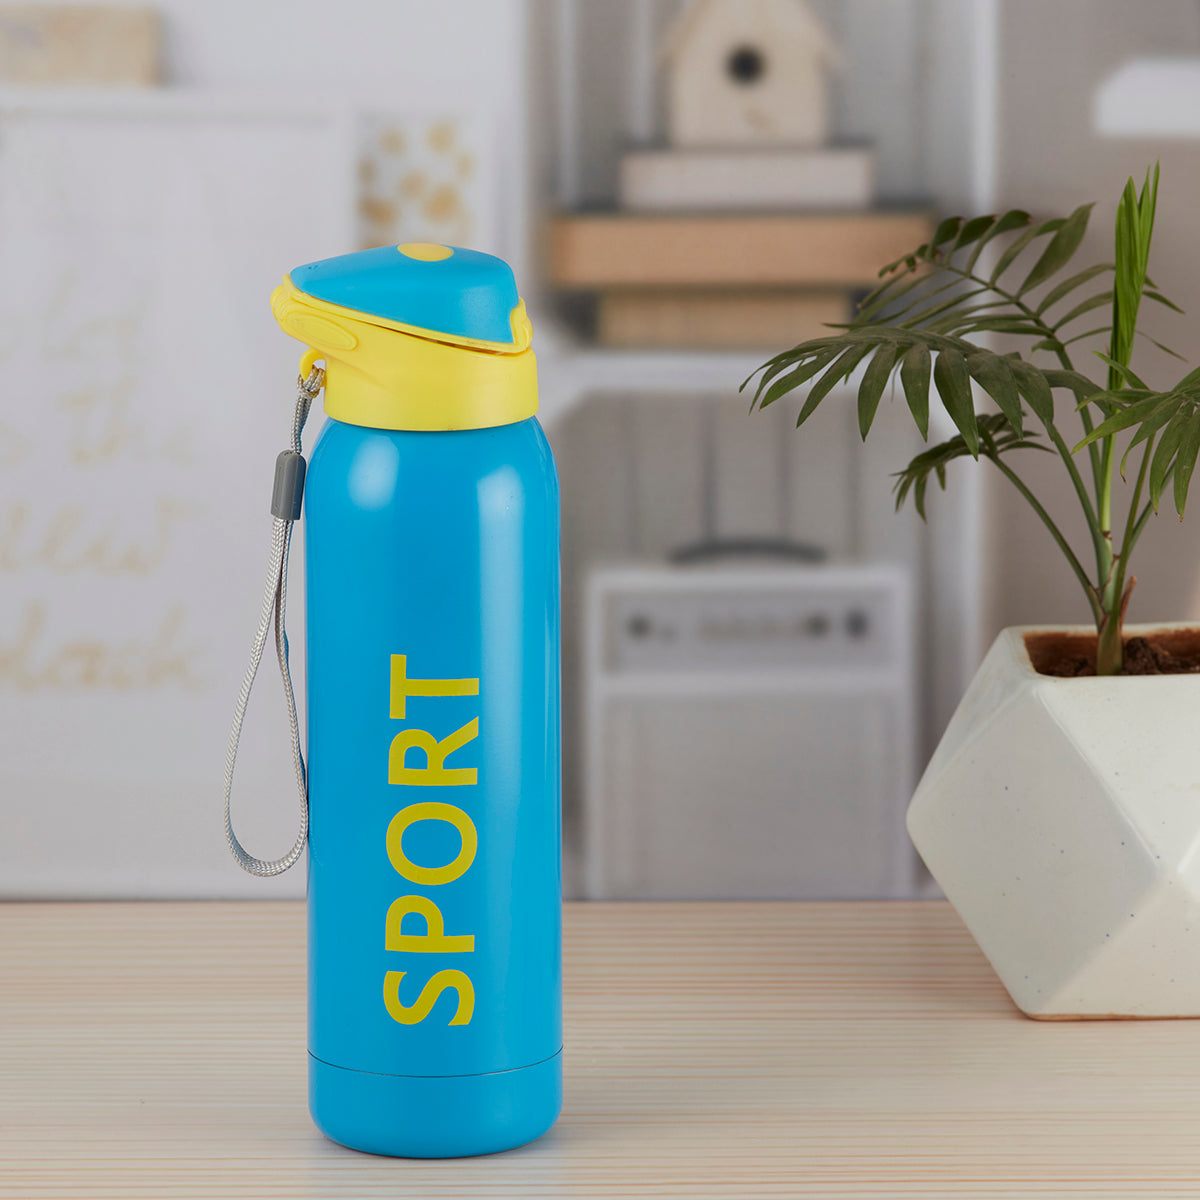 Stainless Steel Vacuum Insulated double wall Water Bottle - 500ml (8426-3-3)